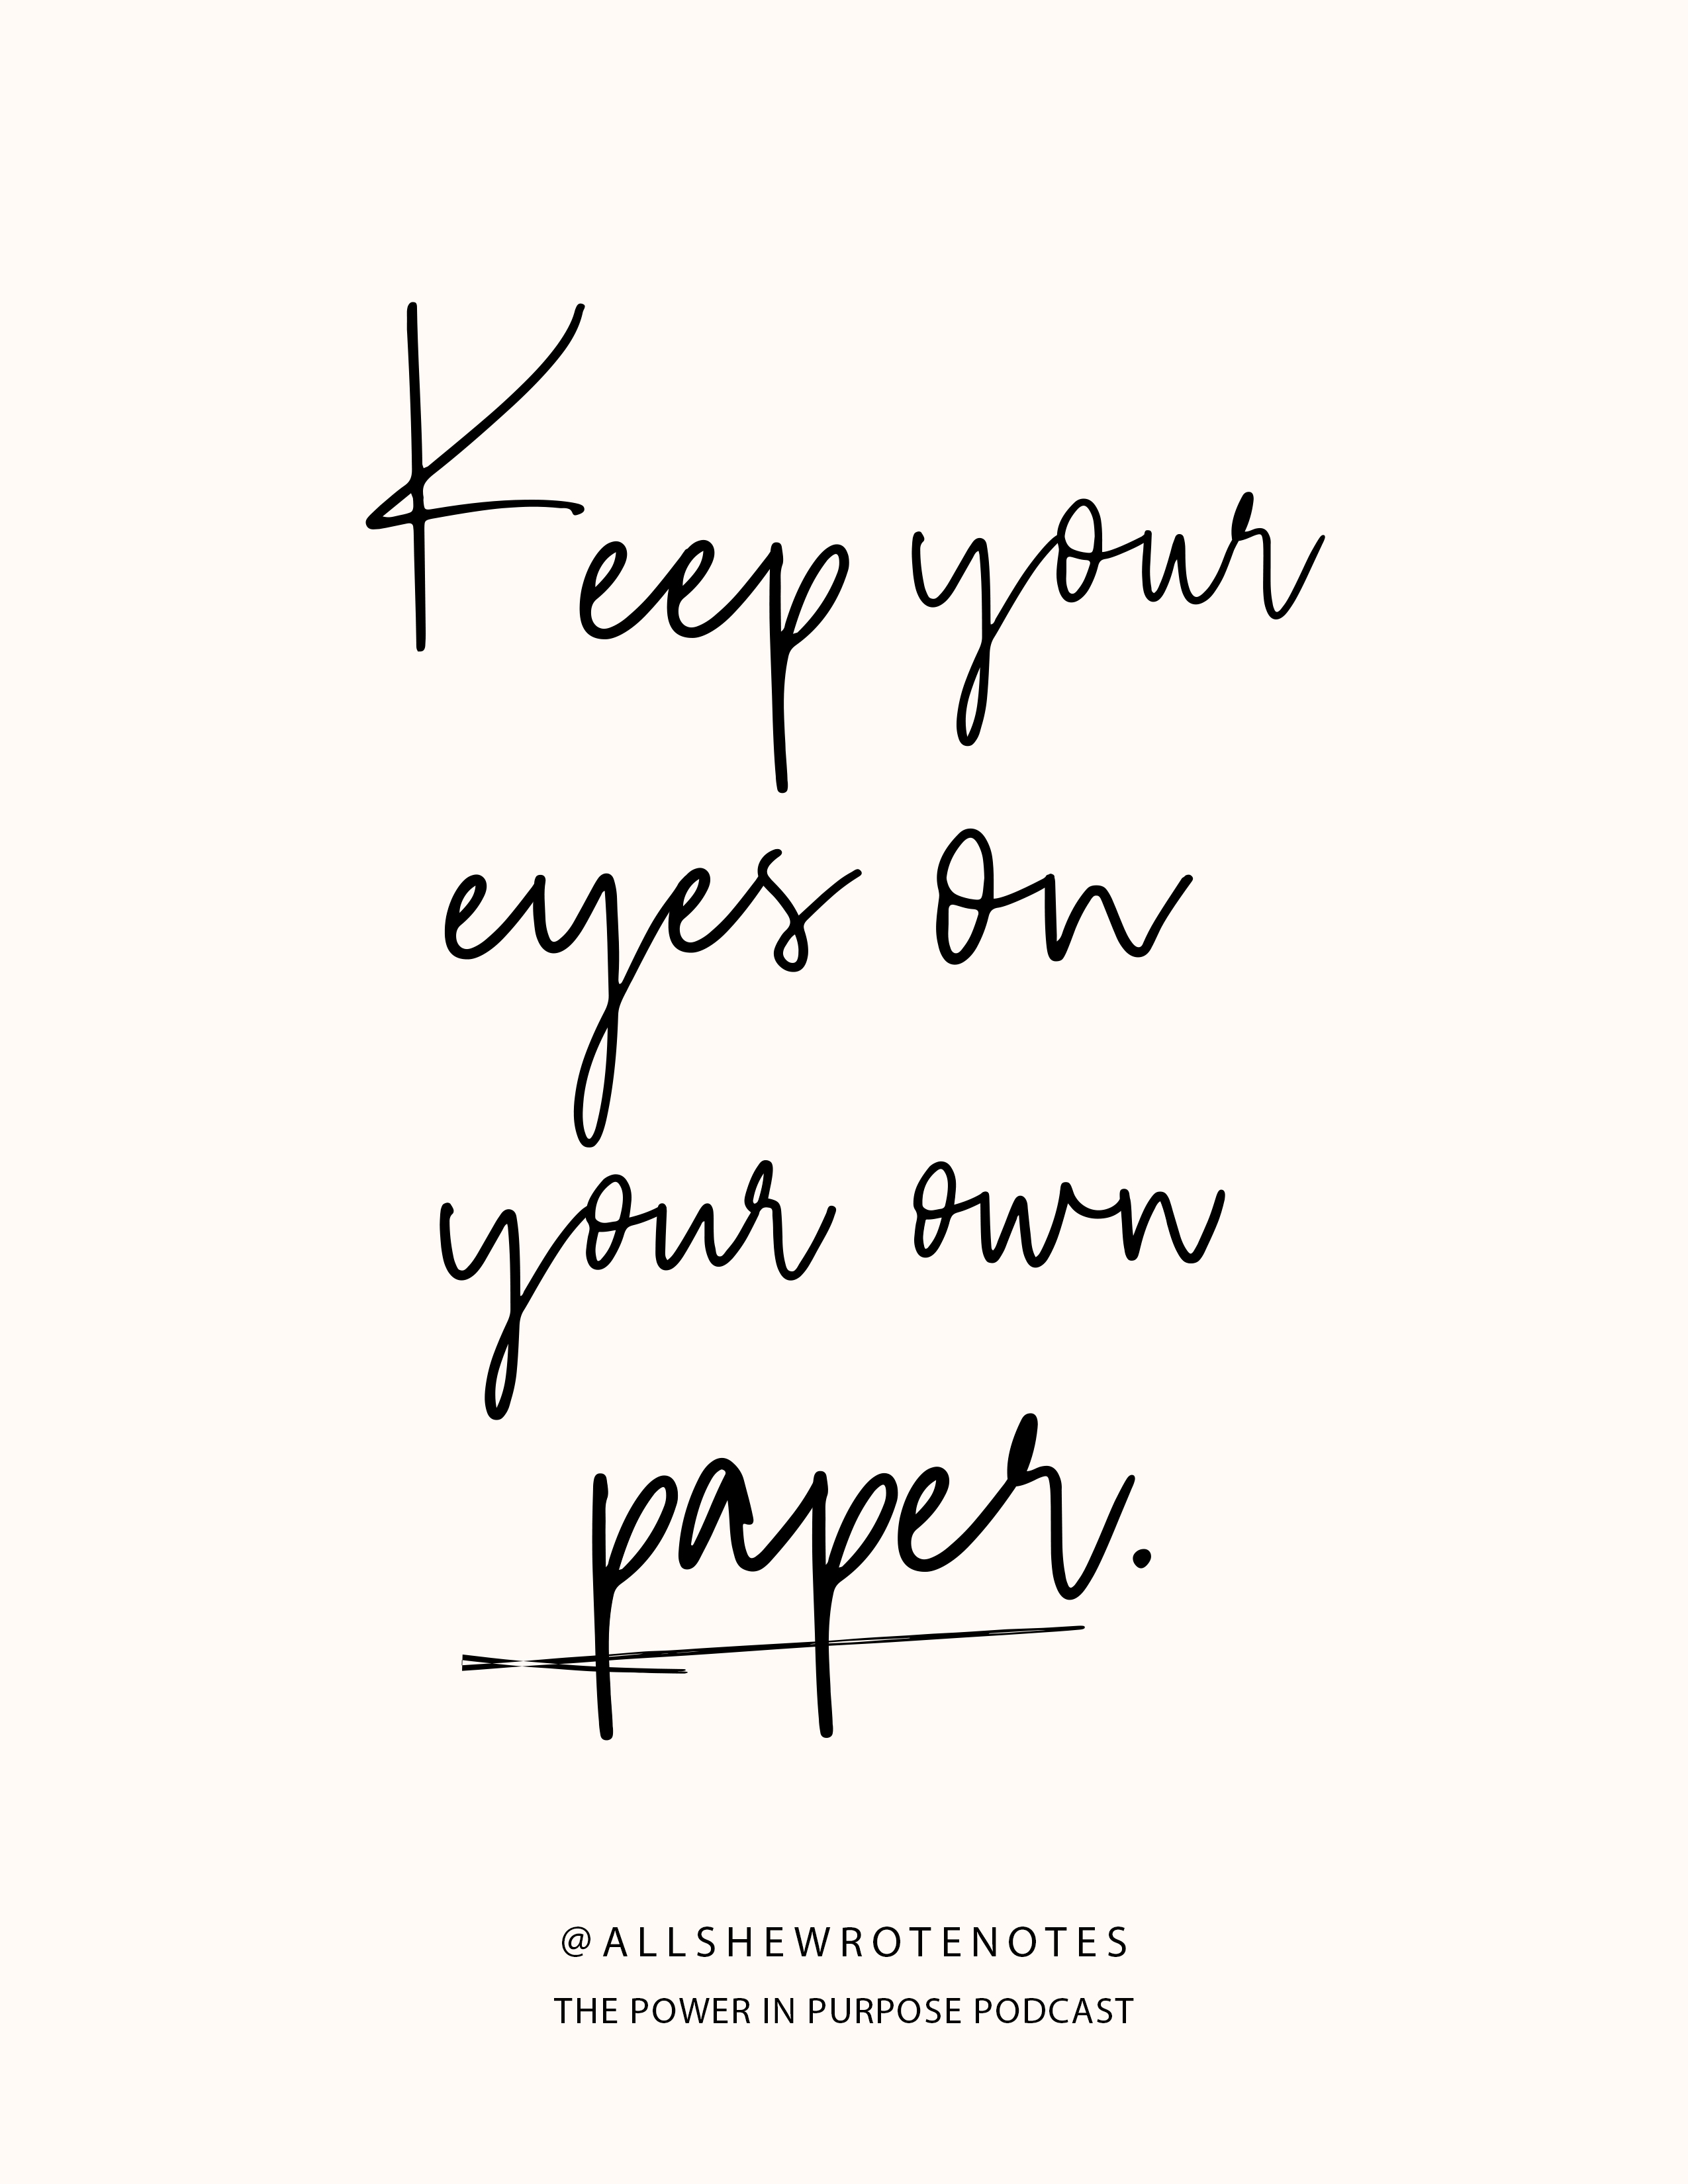 Maghon shares her philosophy to keep your eyes on your own paper when it comes to your business.